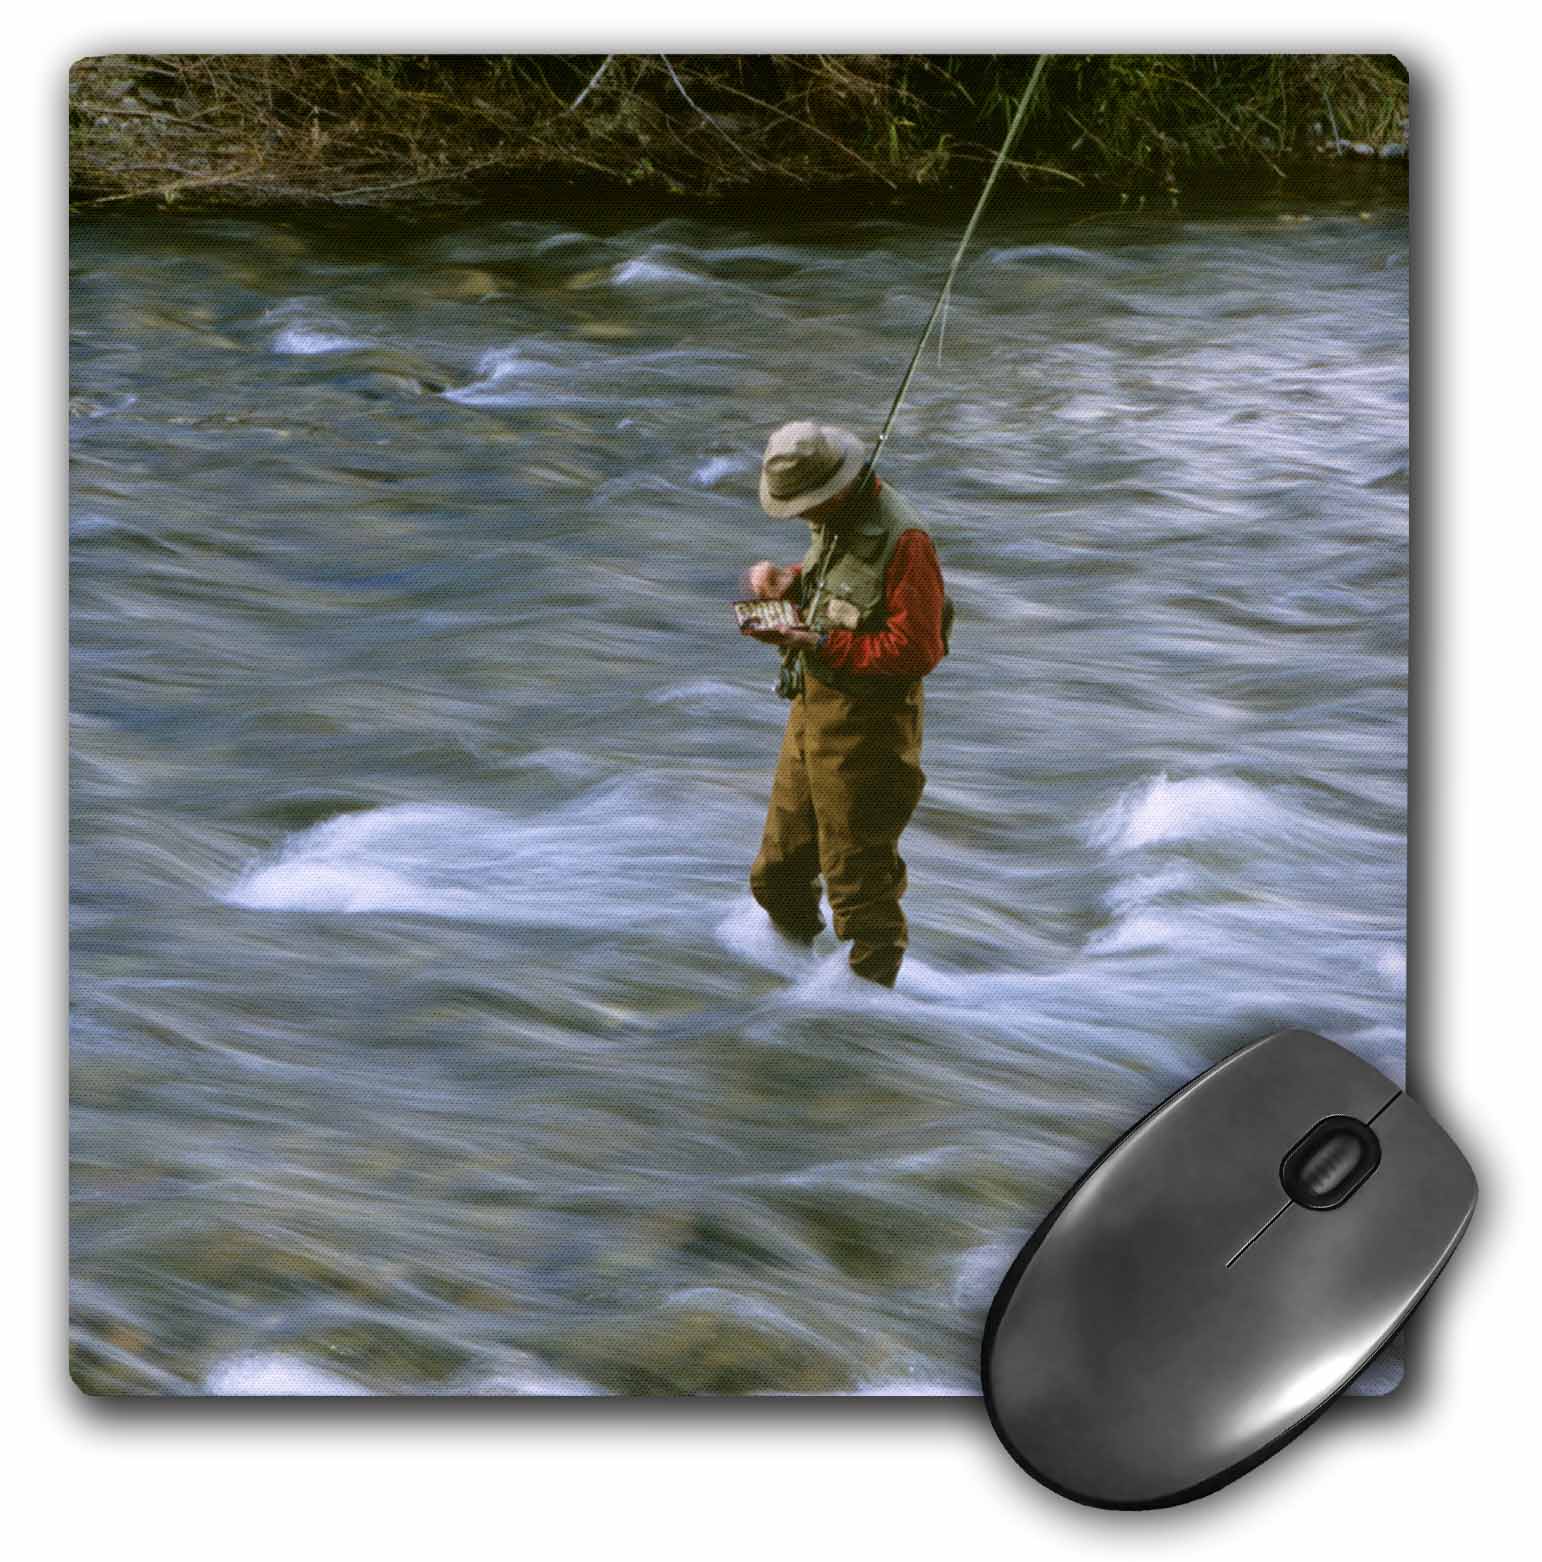 3dRose Fly fishing, Rock Creek, Missoula Montana - US27 CHA1369 - Chuck  Haney, Mouse Pad, 8 by 8 inches 